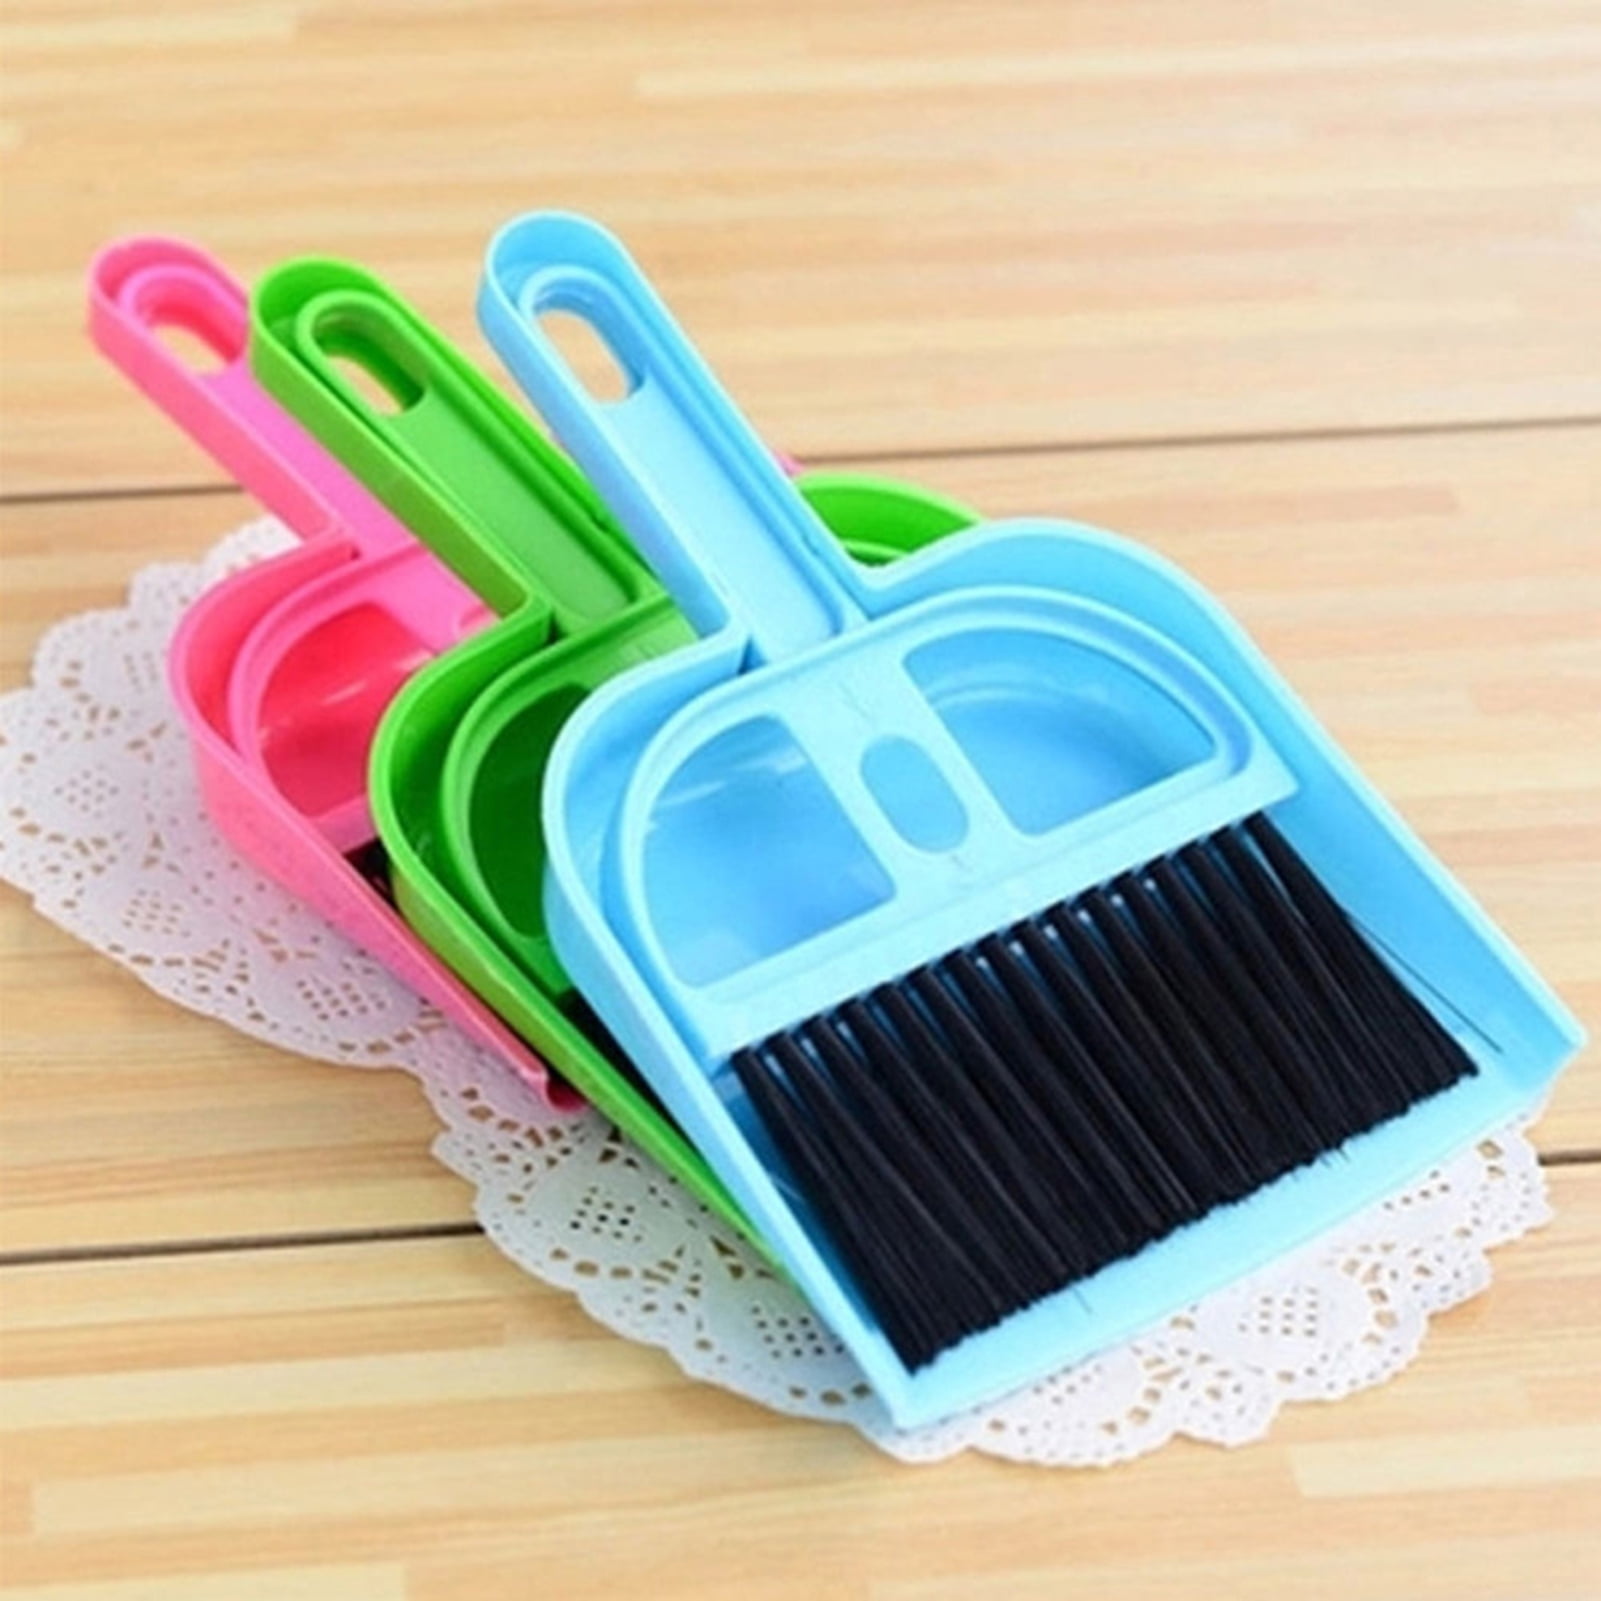 Perastra Mini Brush and Dustpan Set, Hand Broom and Dustpan Set, Small  Broom and Dustpan Set, Small Dust Pan with Brush for Home Kitchen Office  Car